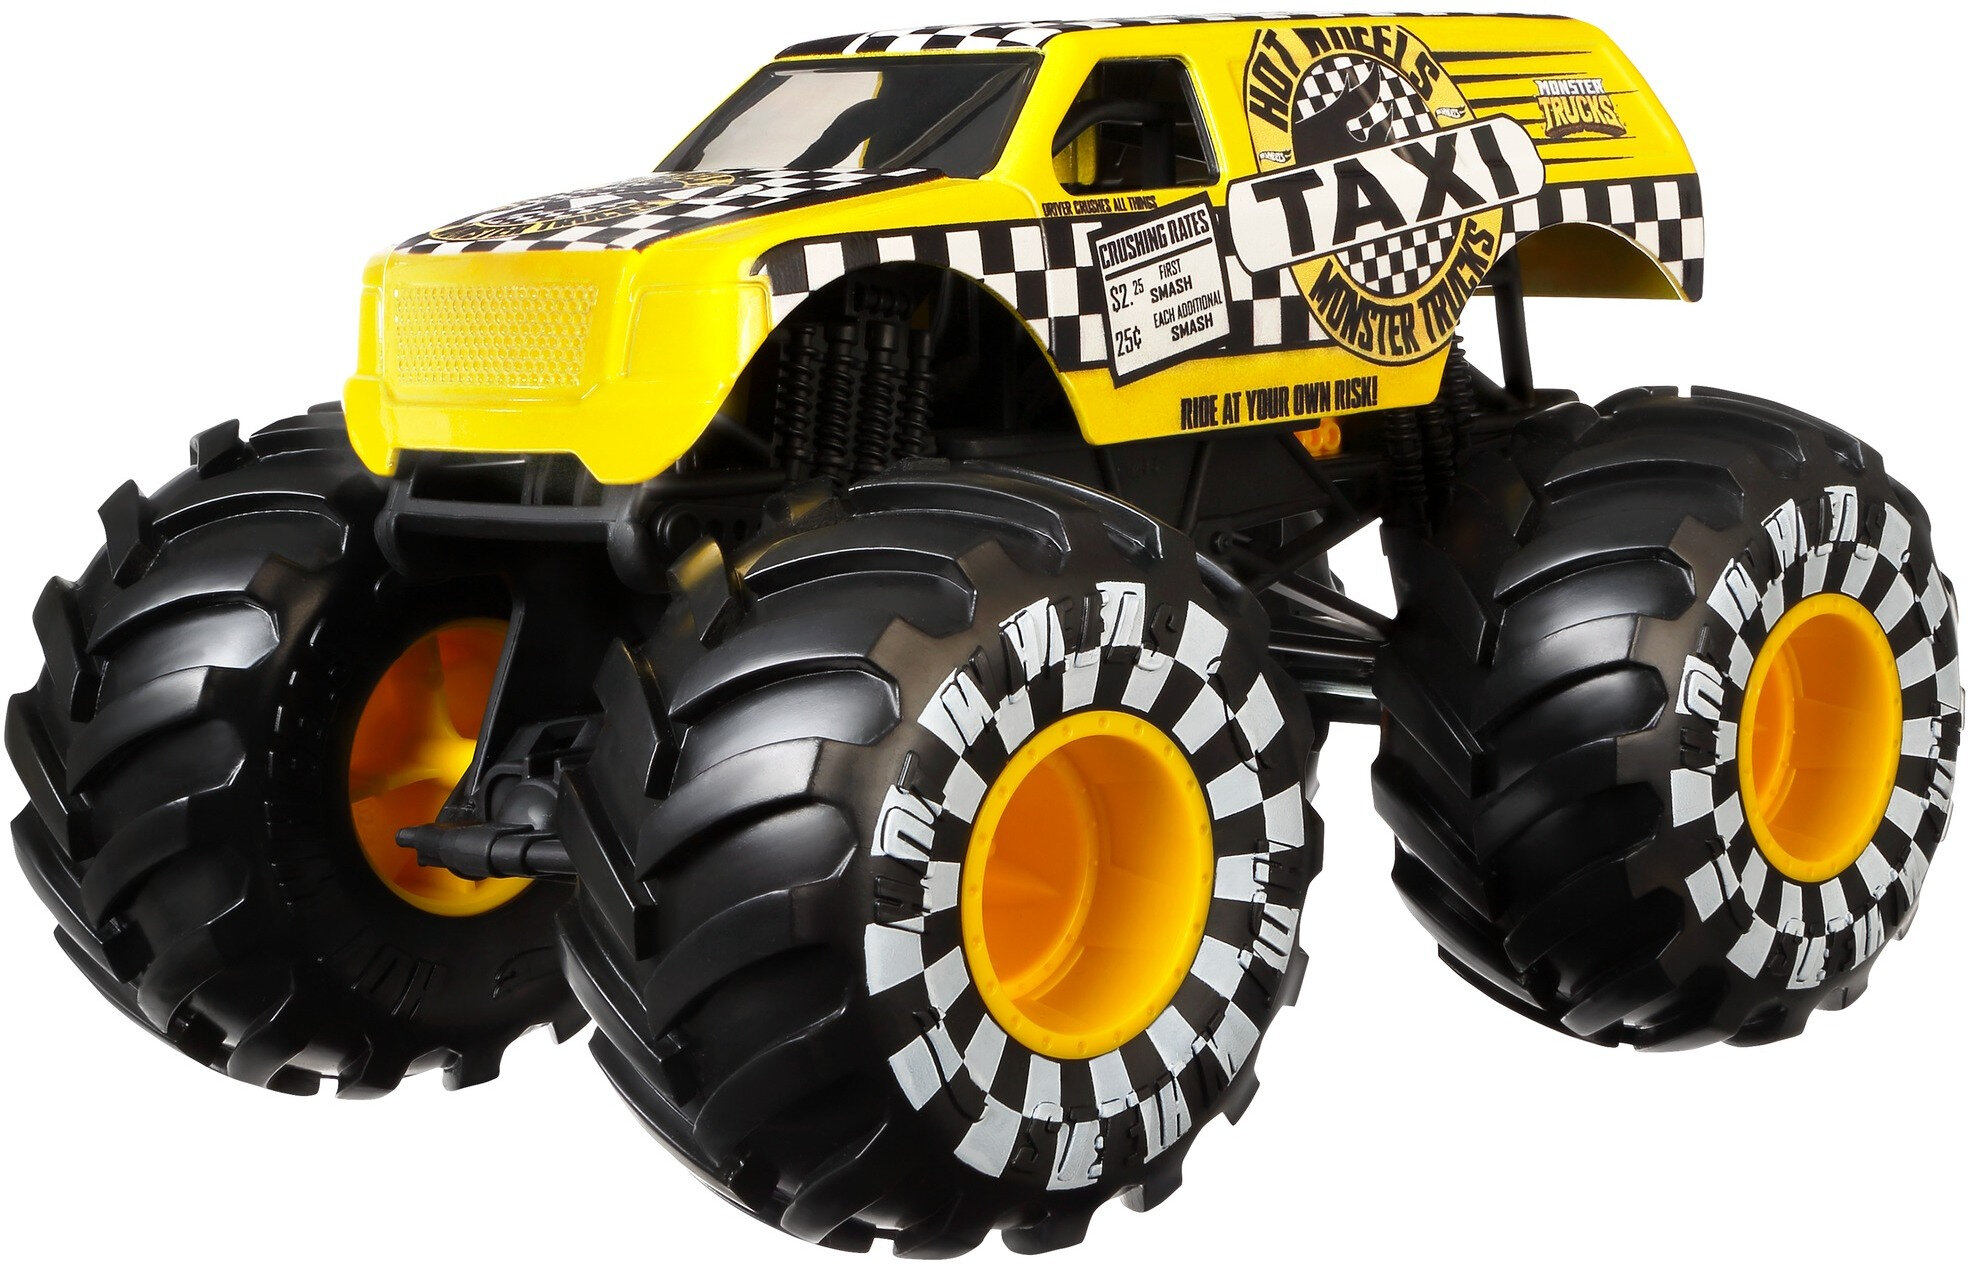 Hot Wheels Monster Trucks Taxi 1:24 Scale Vehicle - image 3 of 5